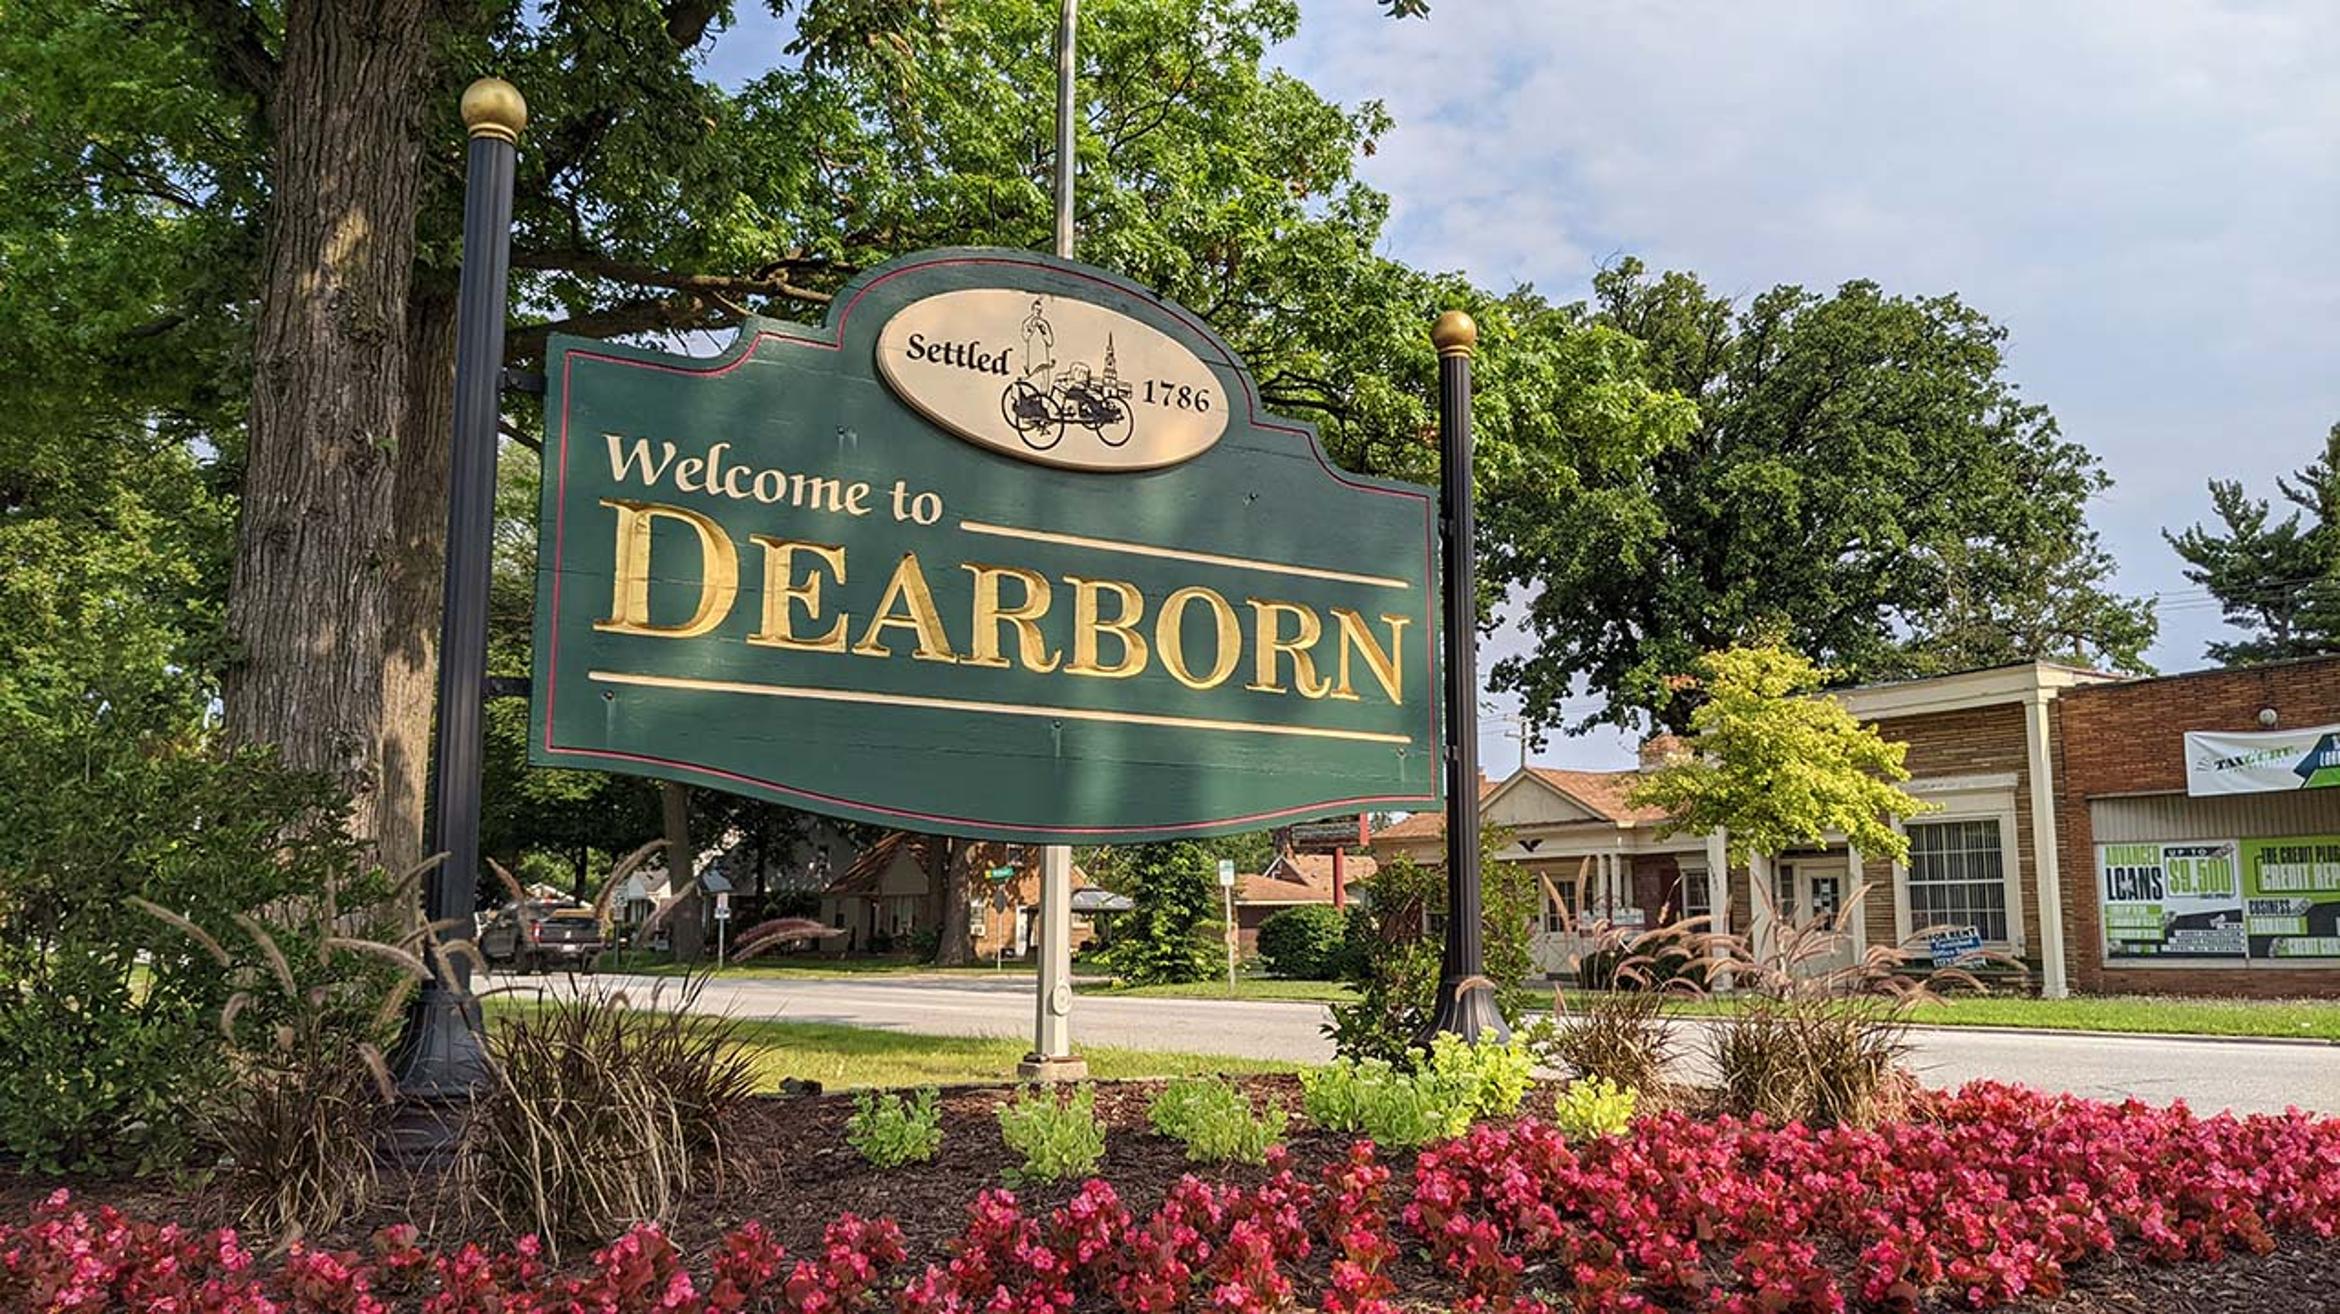 Welcome to Dearborn photo courtesy WDET